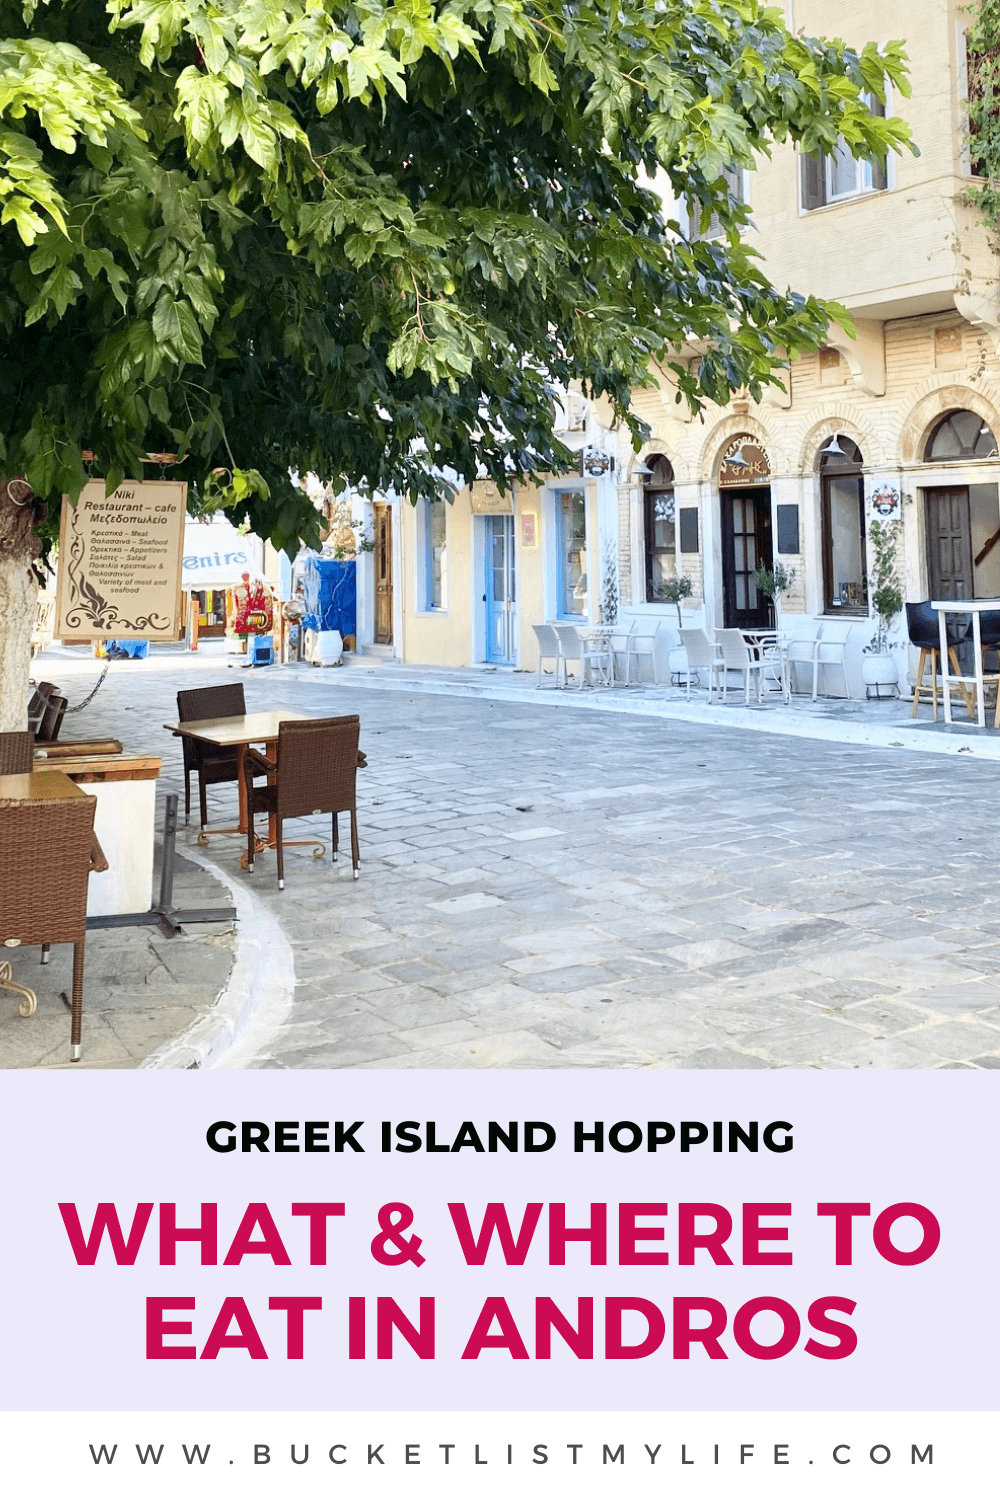 What & Where to Eat in Andros: Best Tavernas & Shops